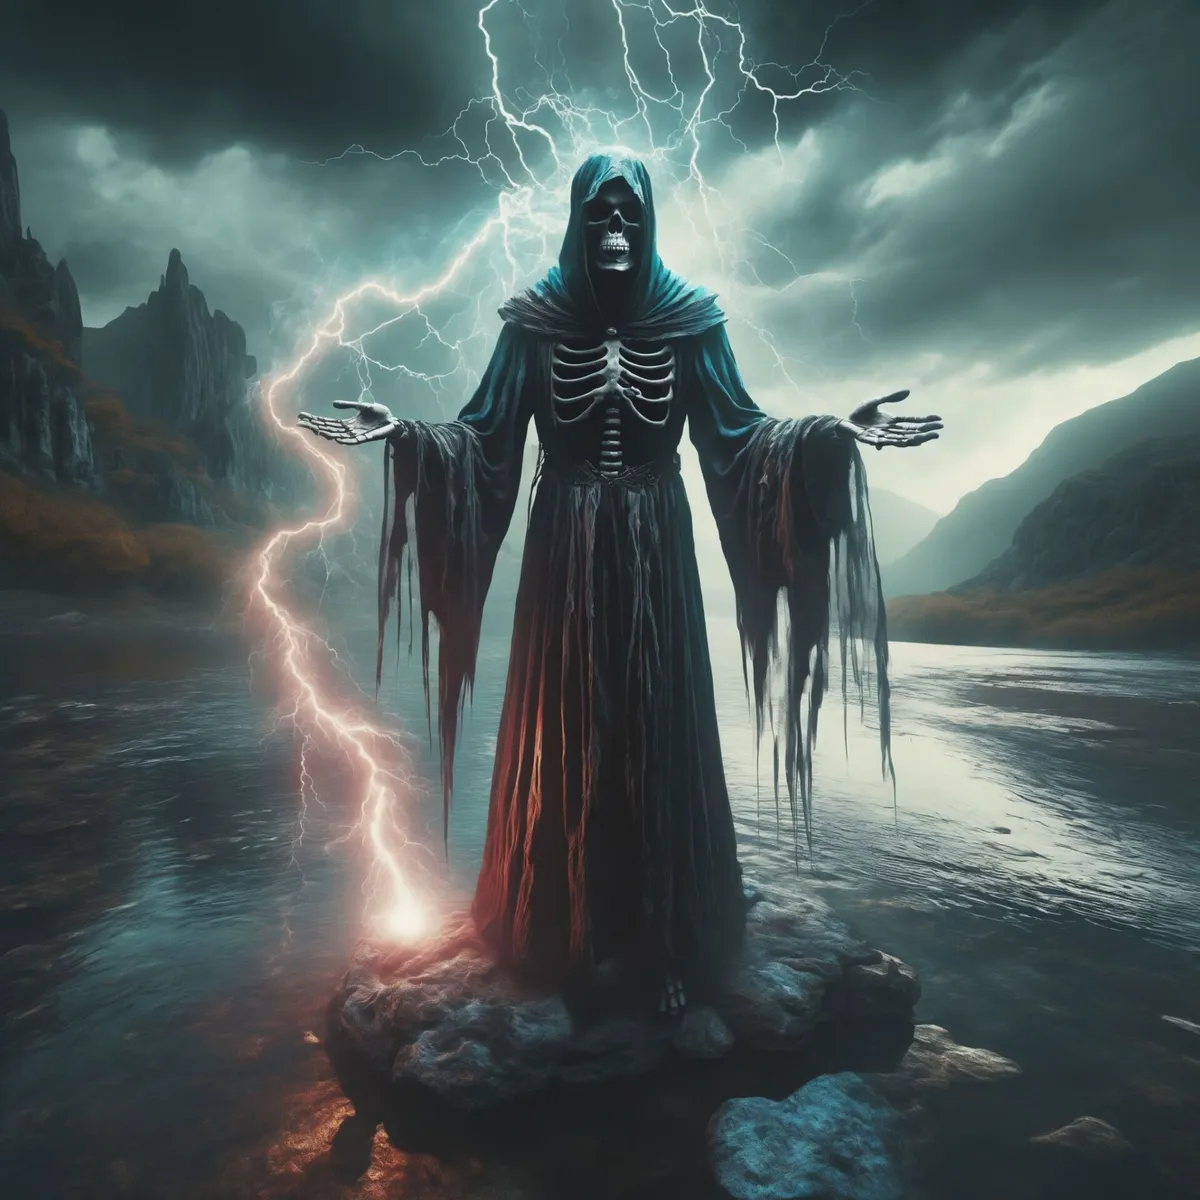 A dramatic AI generated image using Stable Diffusion of a grim reaper with a skeletal face, wearing tattered robes, standing on a rock with arms outstretched as lightning strikes. The background features a dark, stormy sky and rugged landscape.